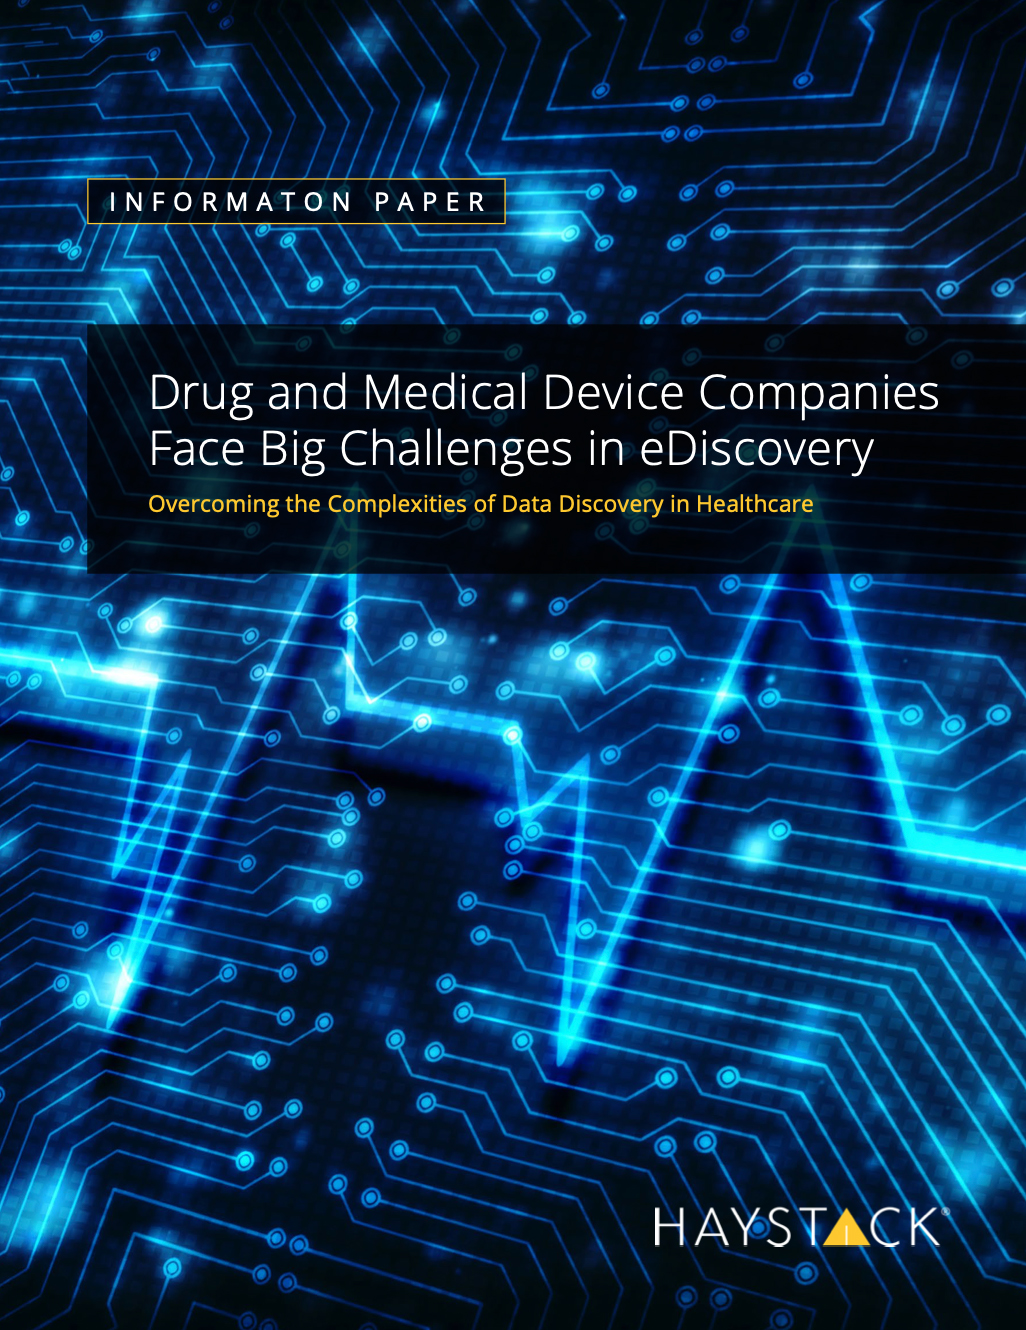 Drug and Medical Device Companies Face Big Challenges in eDiscovery